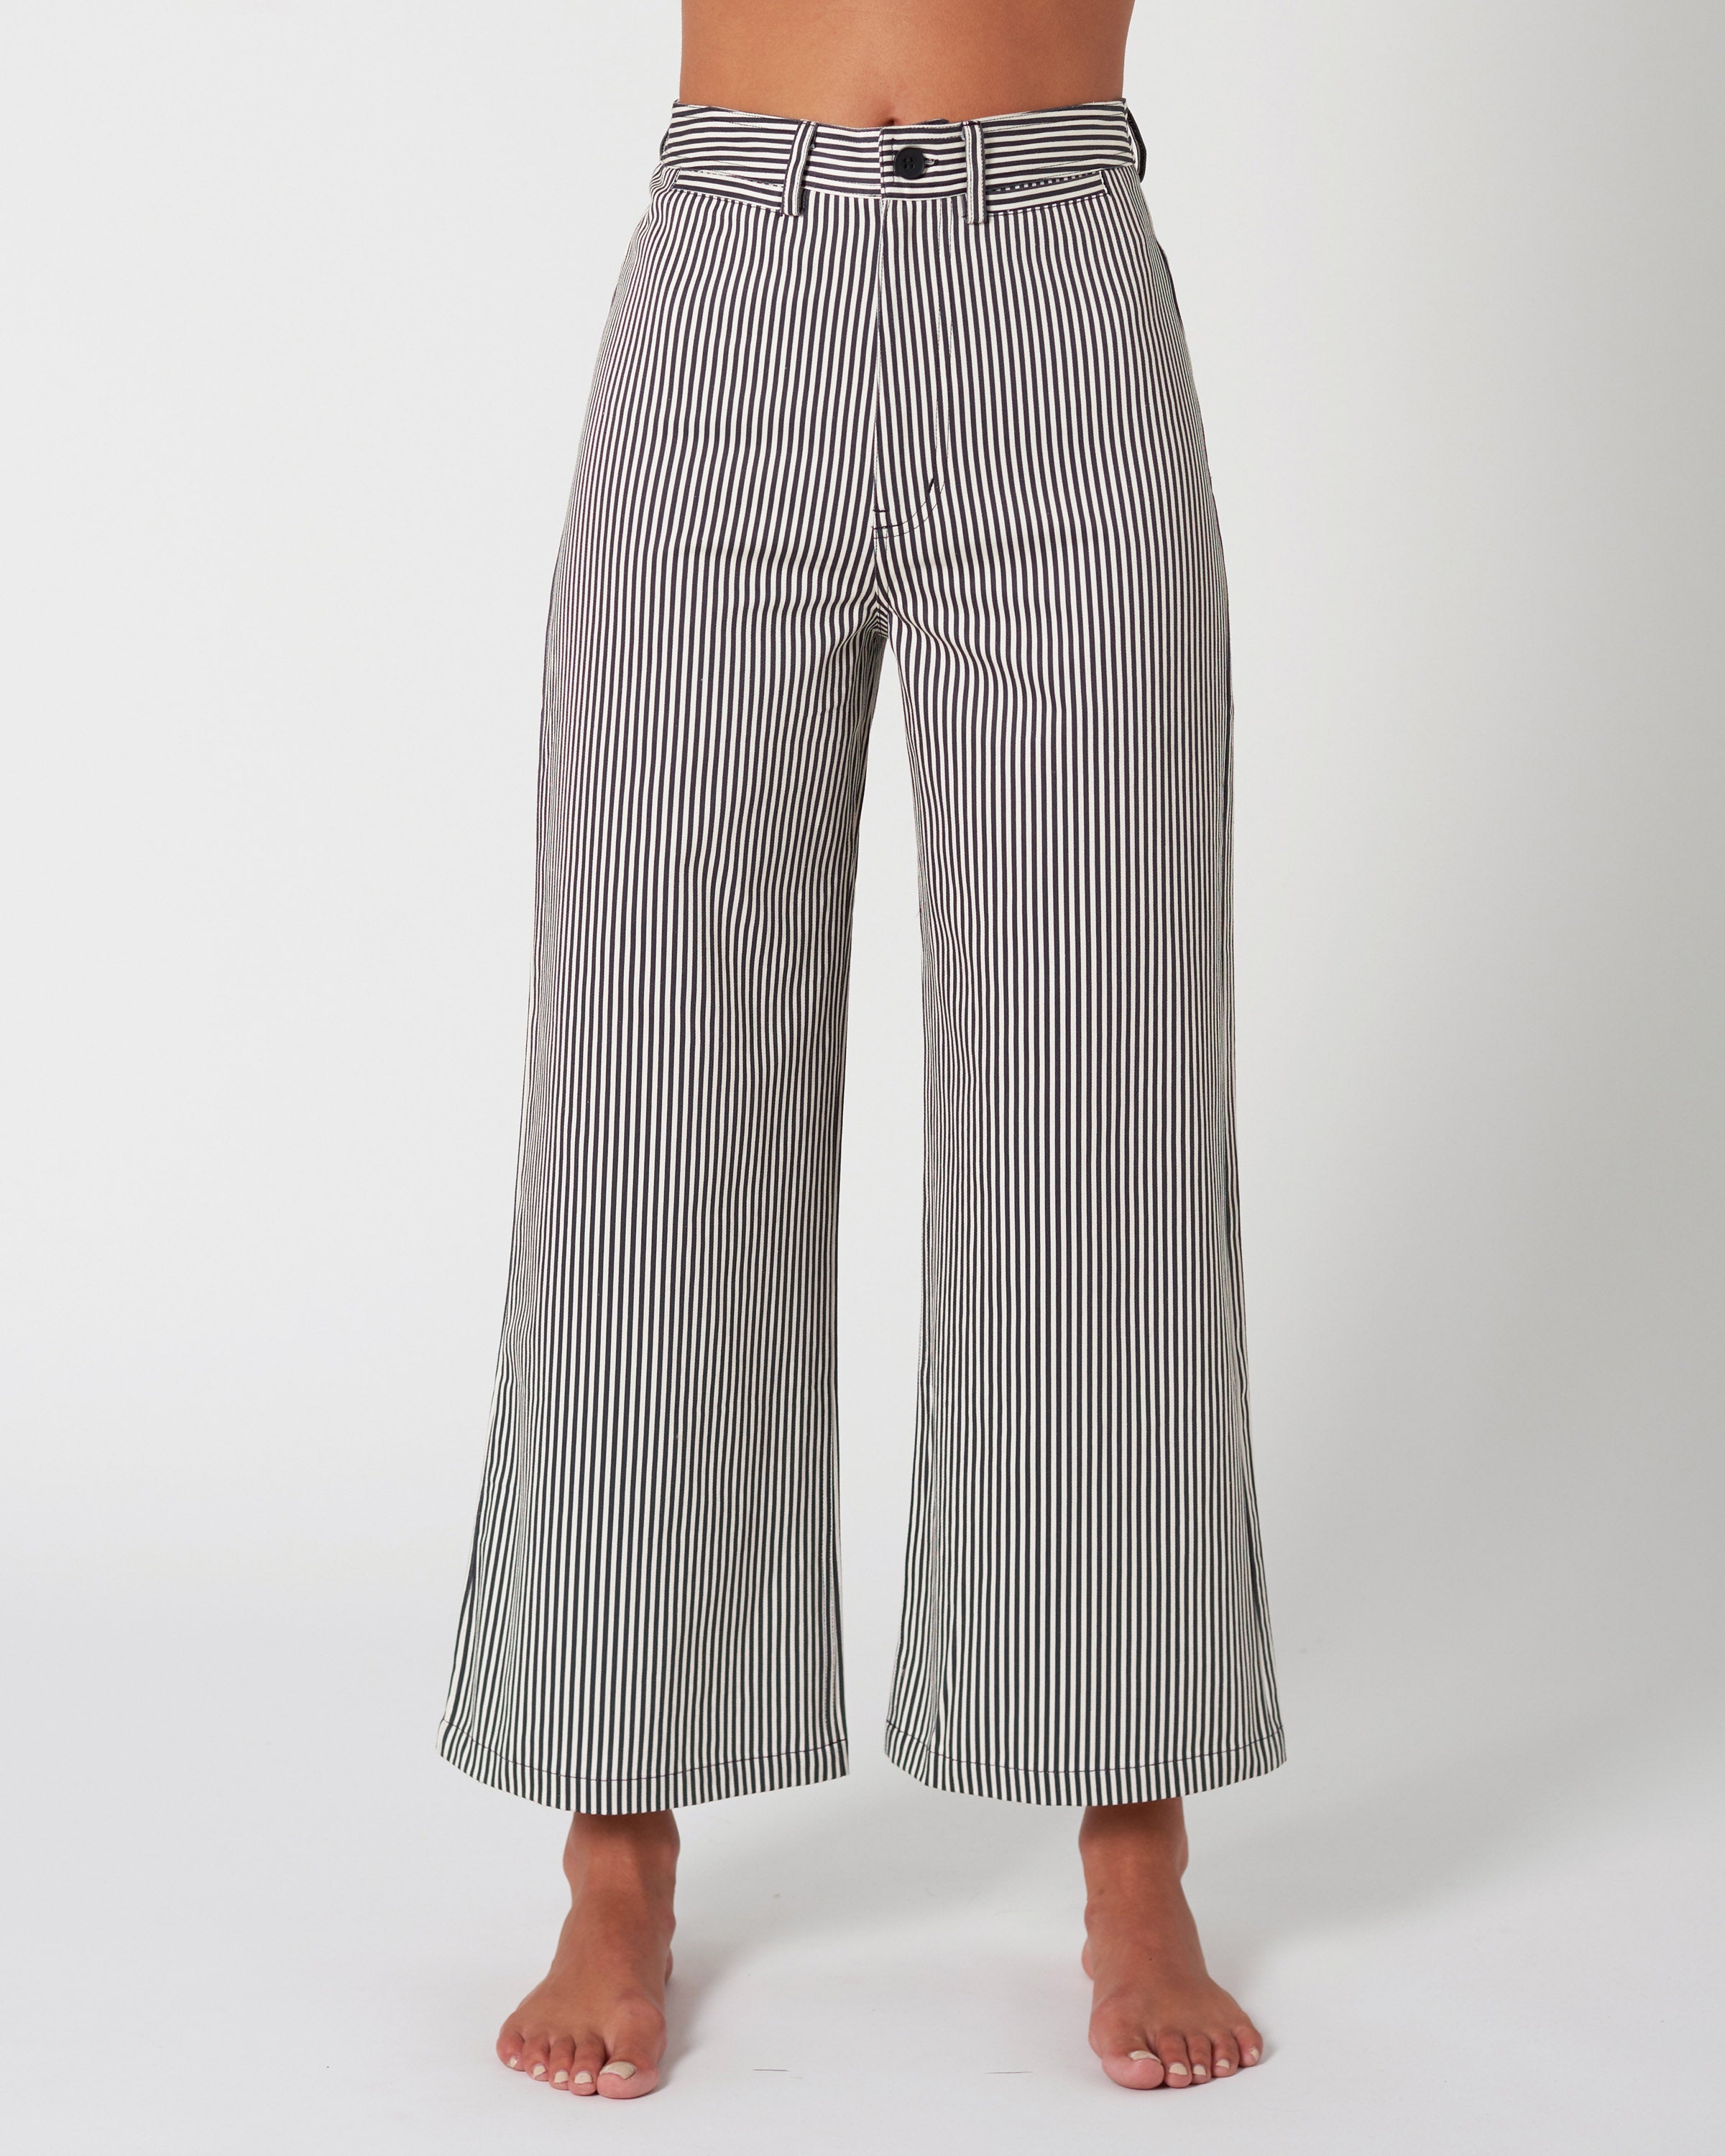 Rolla's Sailor Pant - More Relaxed Fit SALE